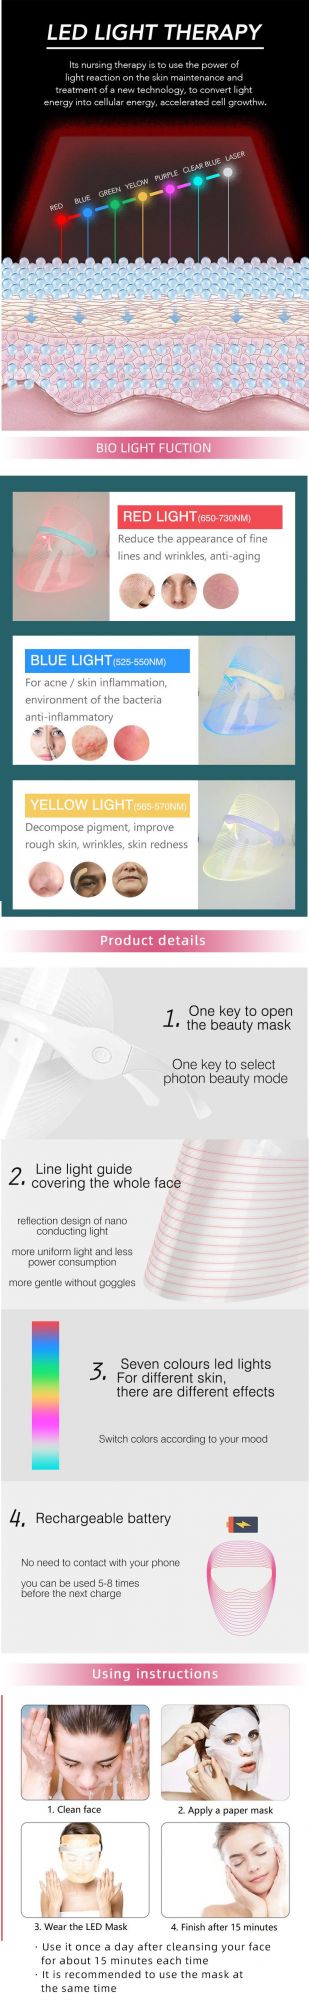 7 Colors Face Therapy LED Phototherapy Skin Mask Beauty Device